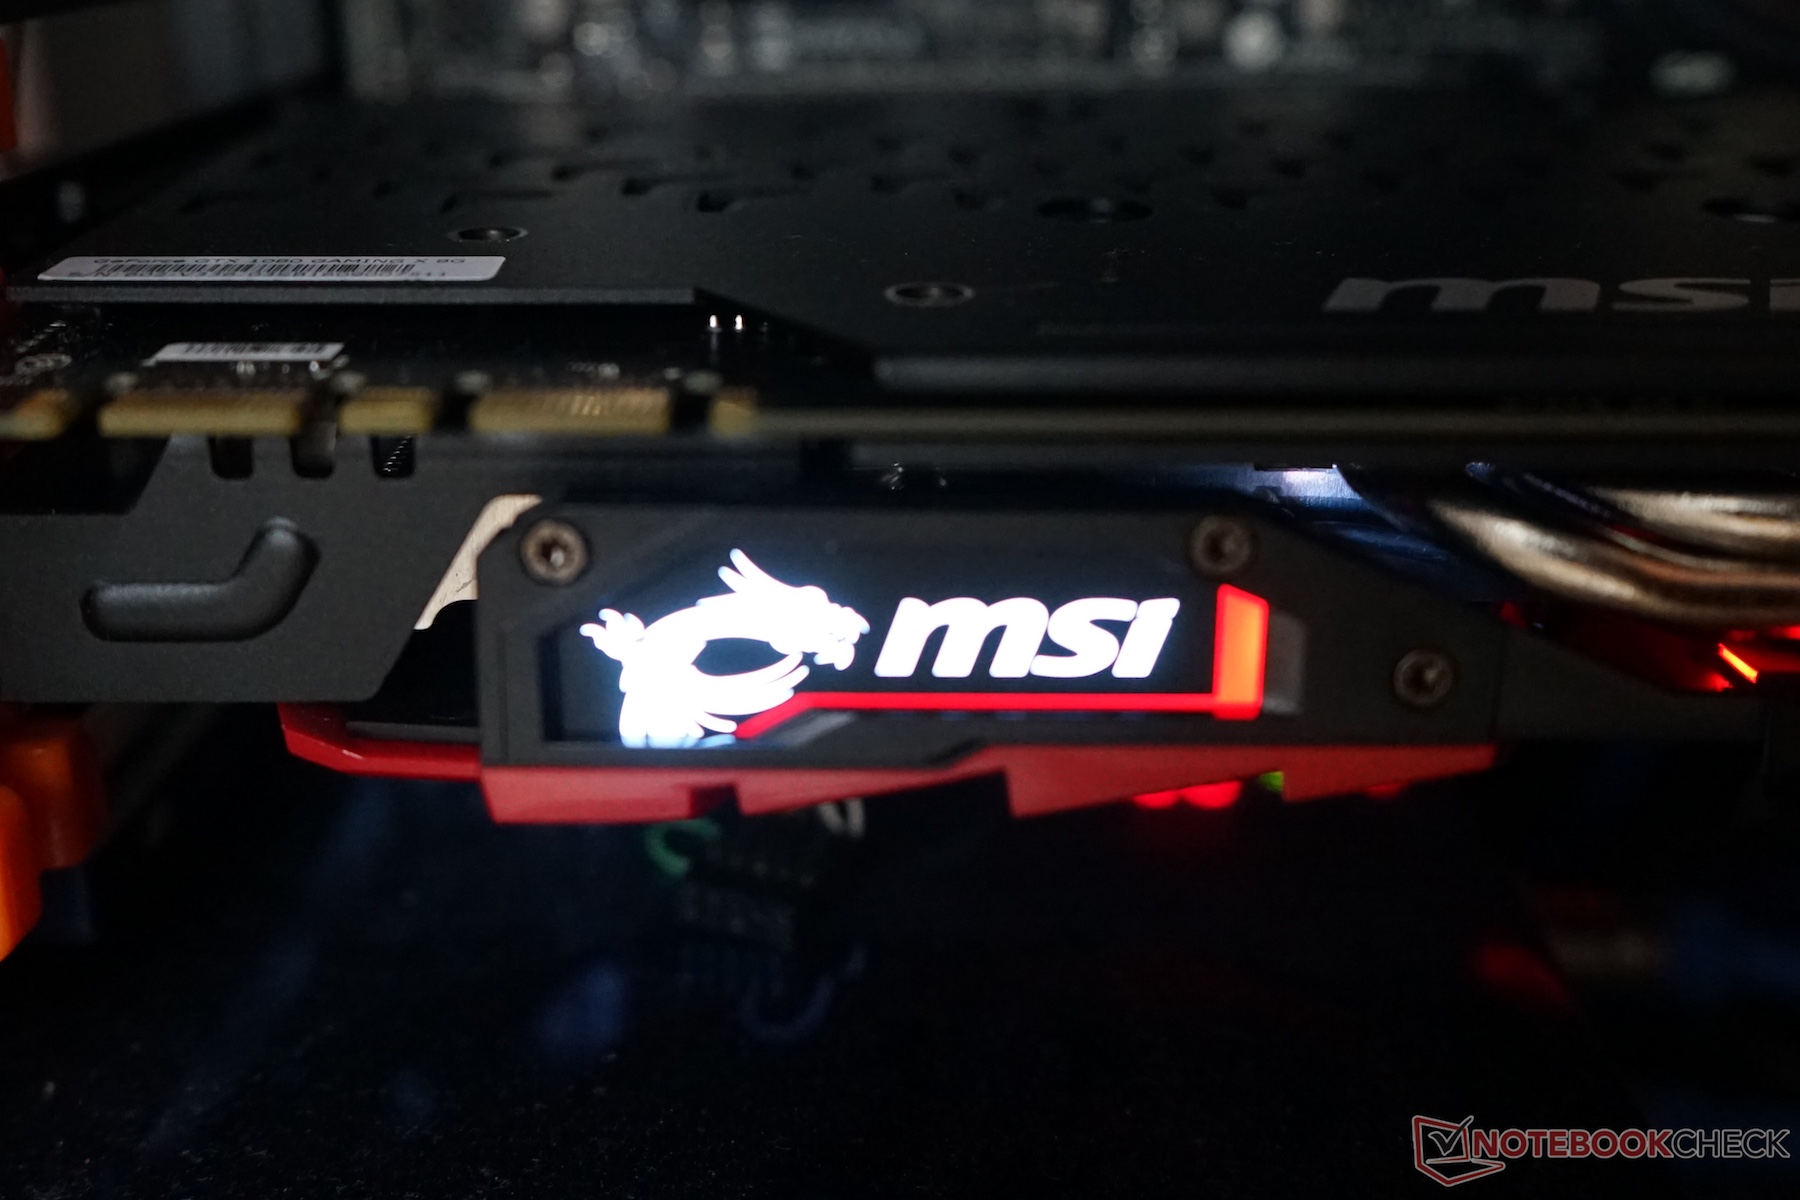 MSI GeForce GTX 1080 Gaming X 8G Review - NotebookCheck.net Reviews